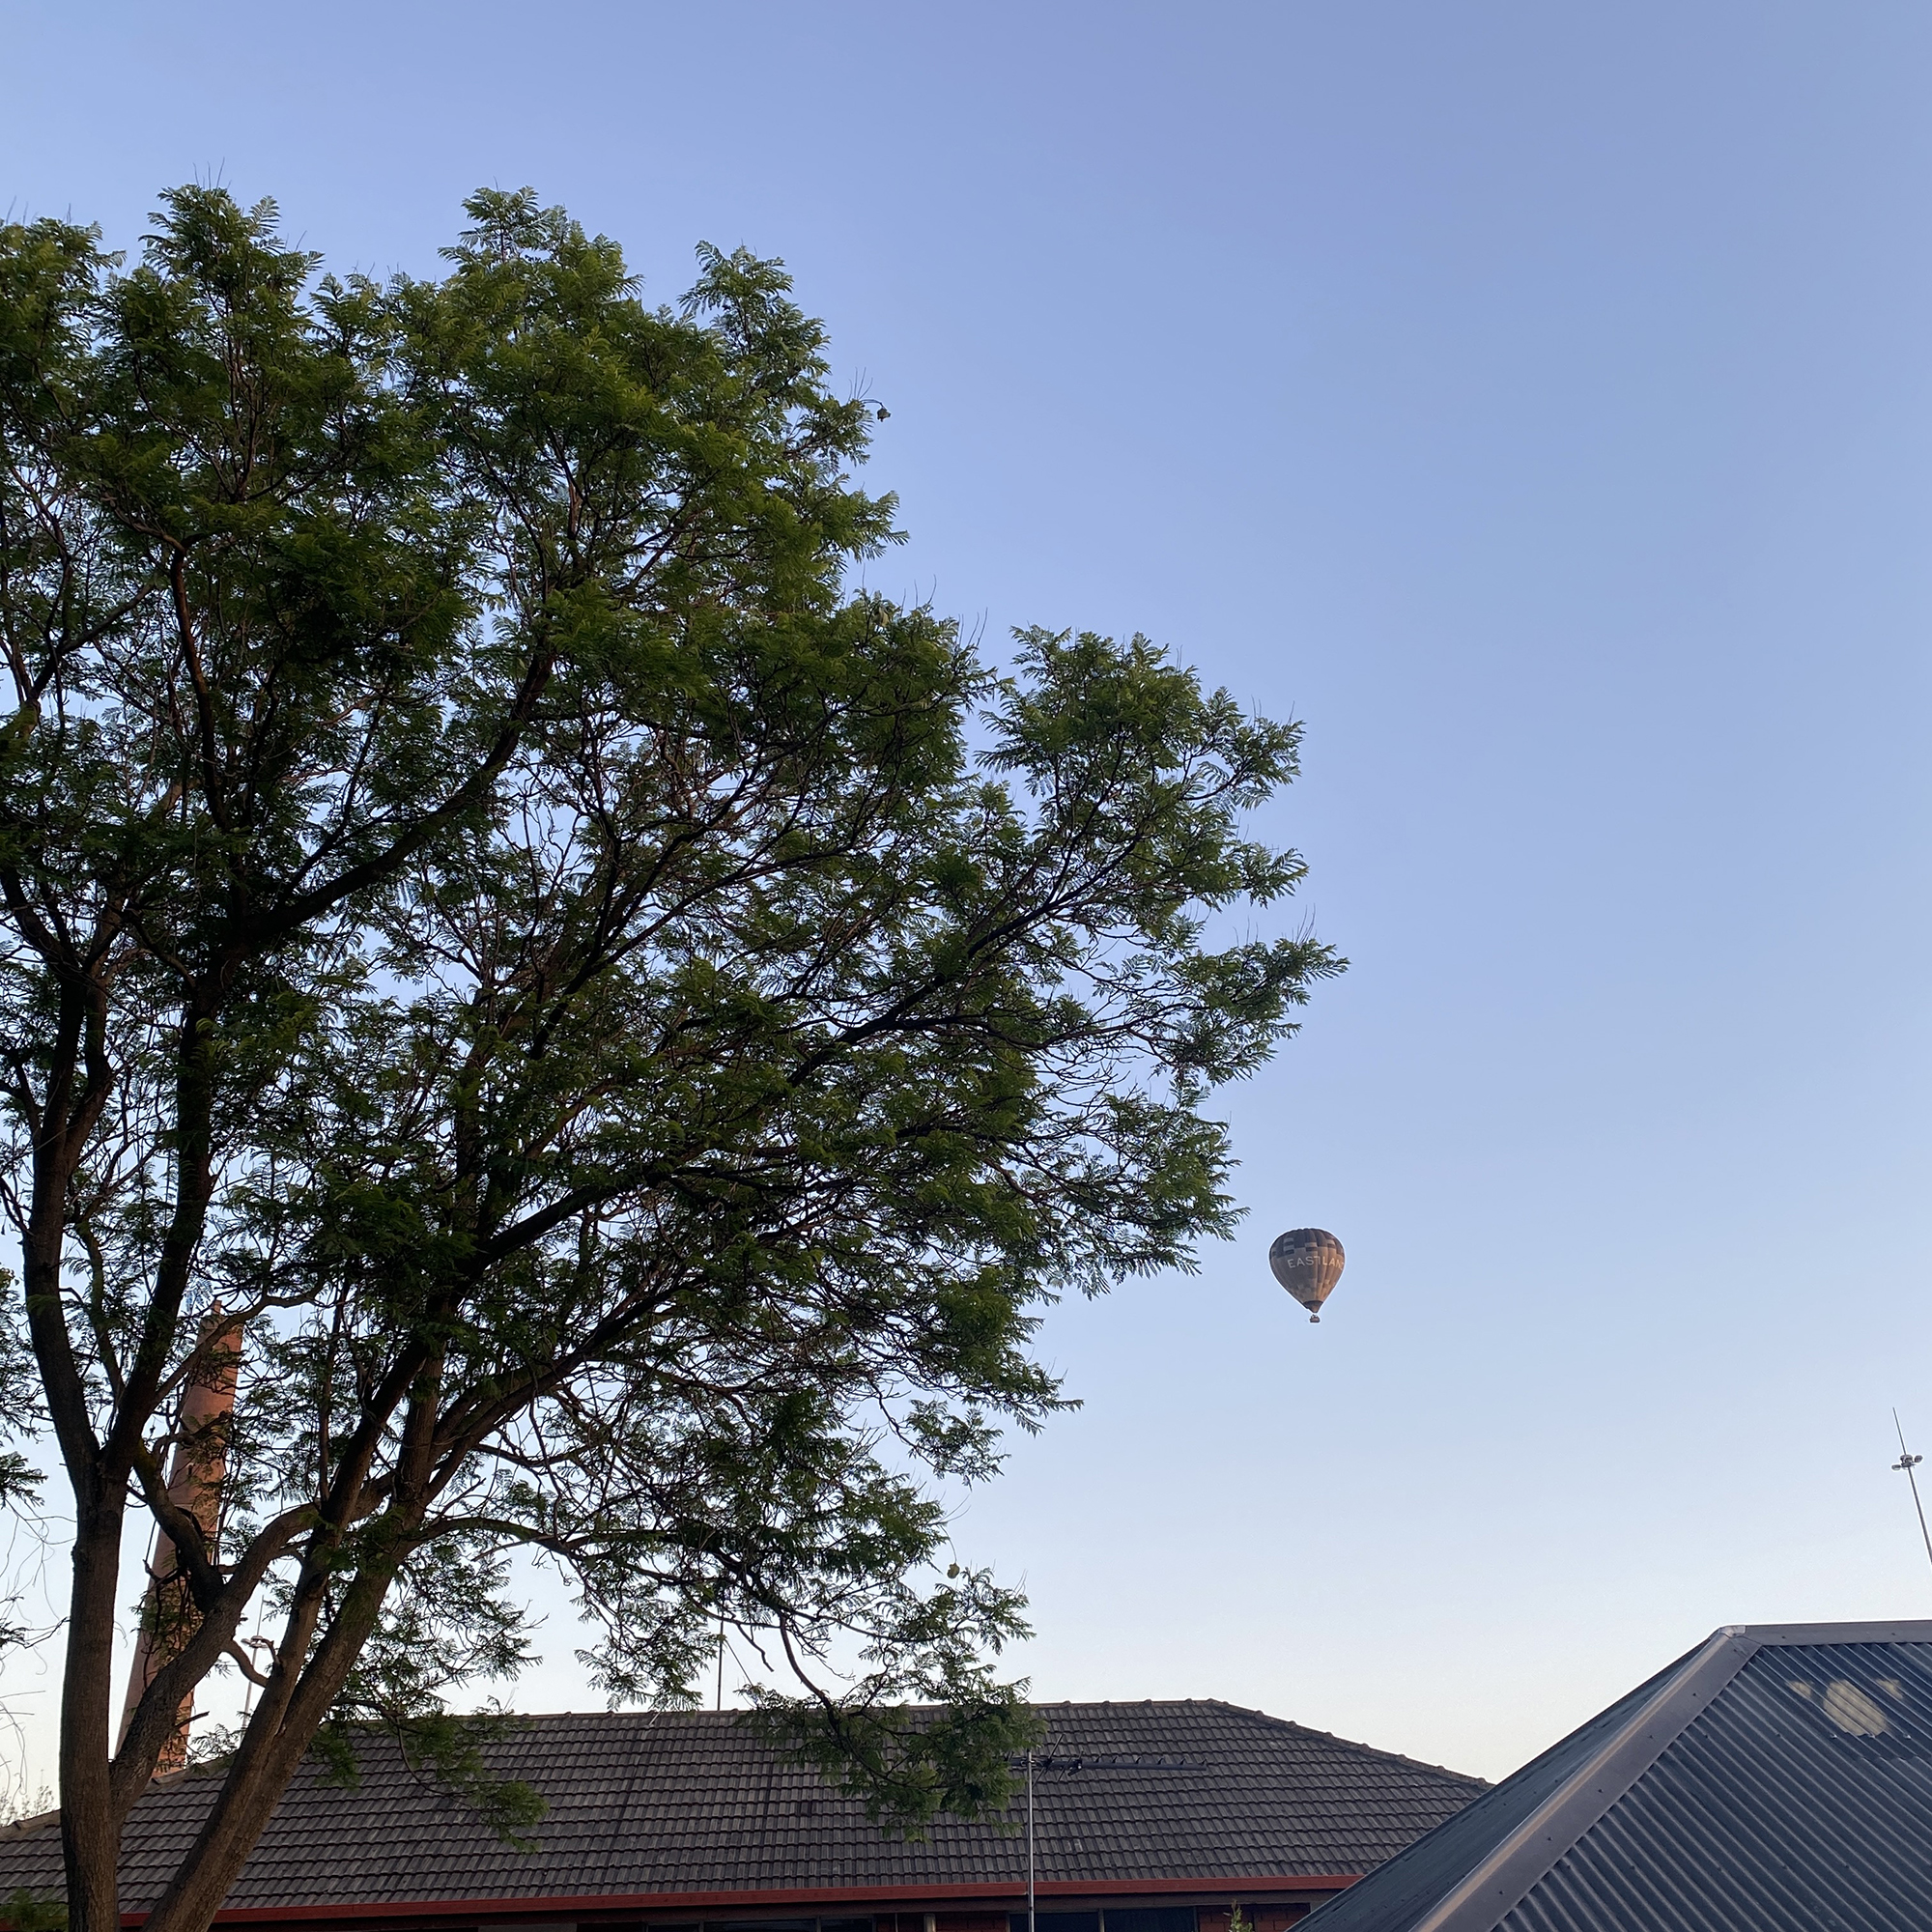 Hottest 100 morning - hot air balloons from the balcony (with a view of a tree)